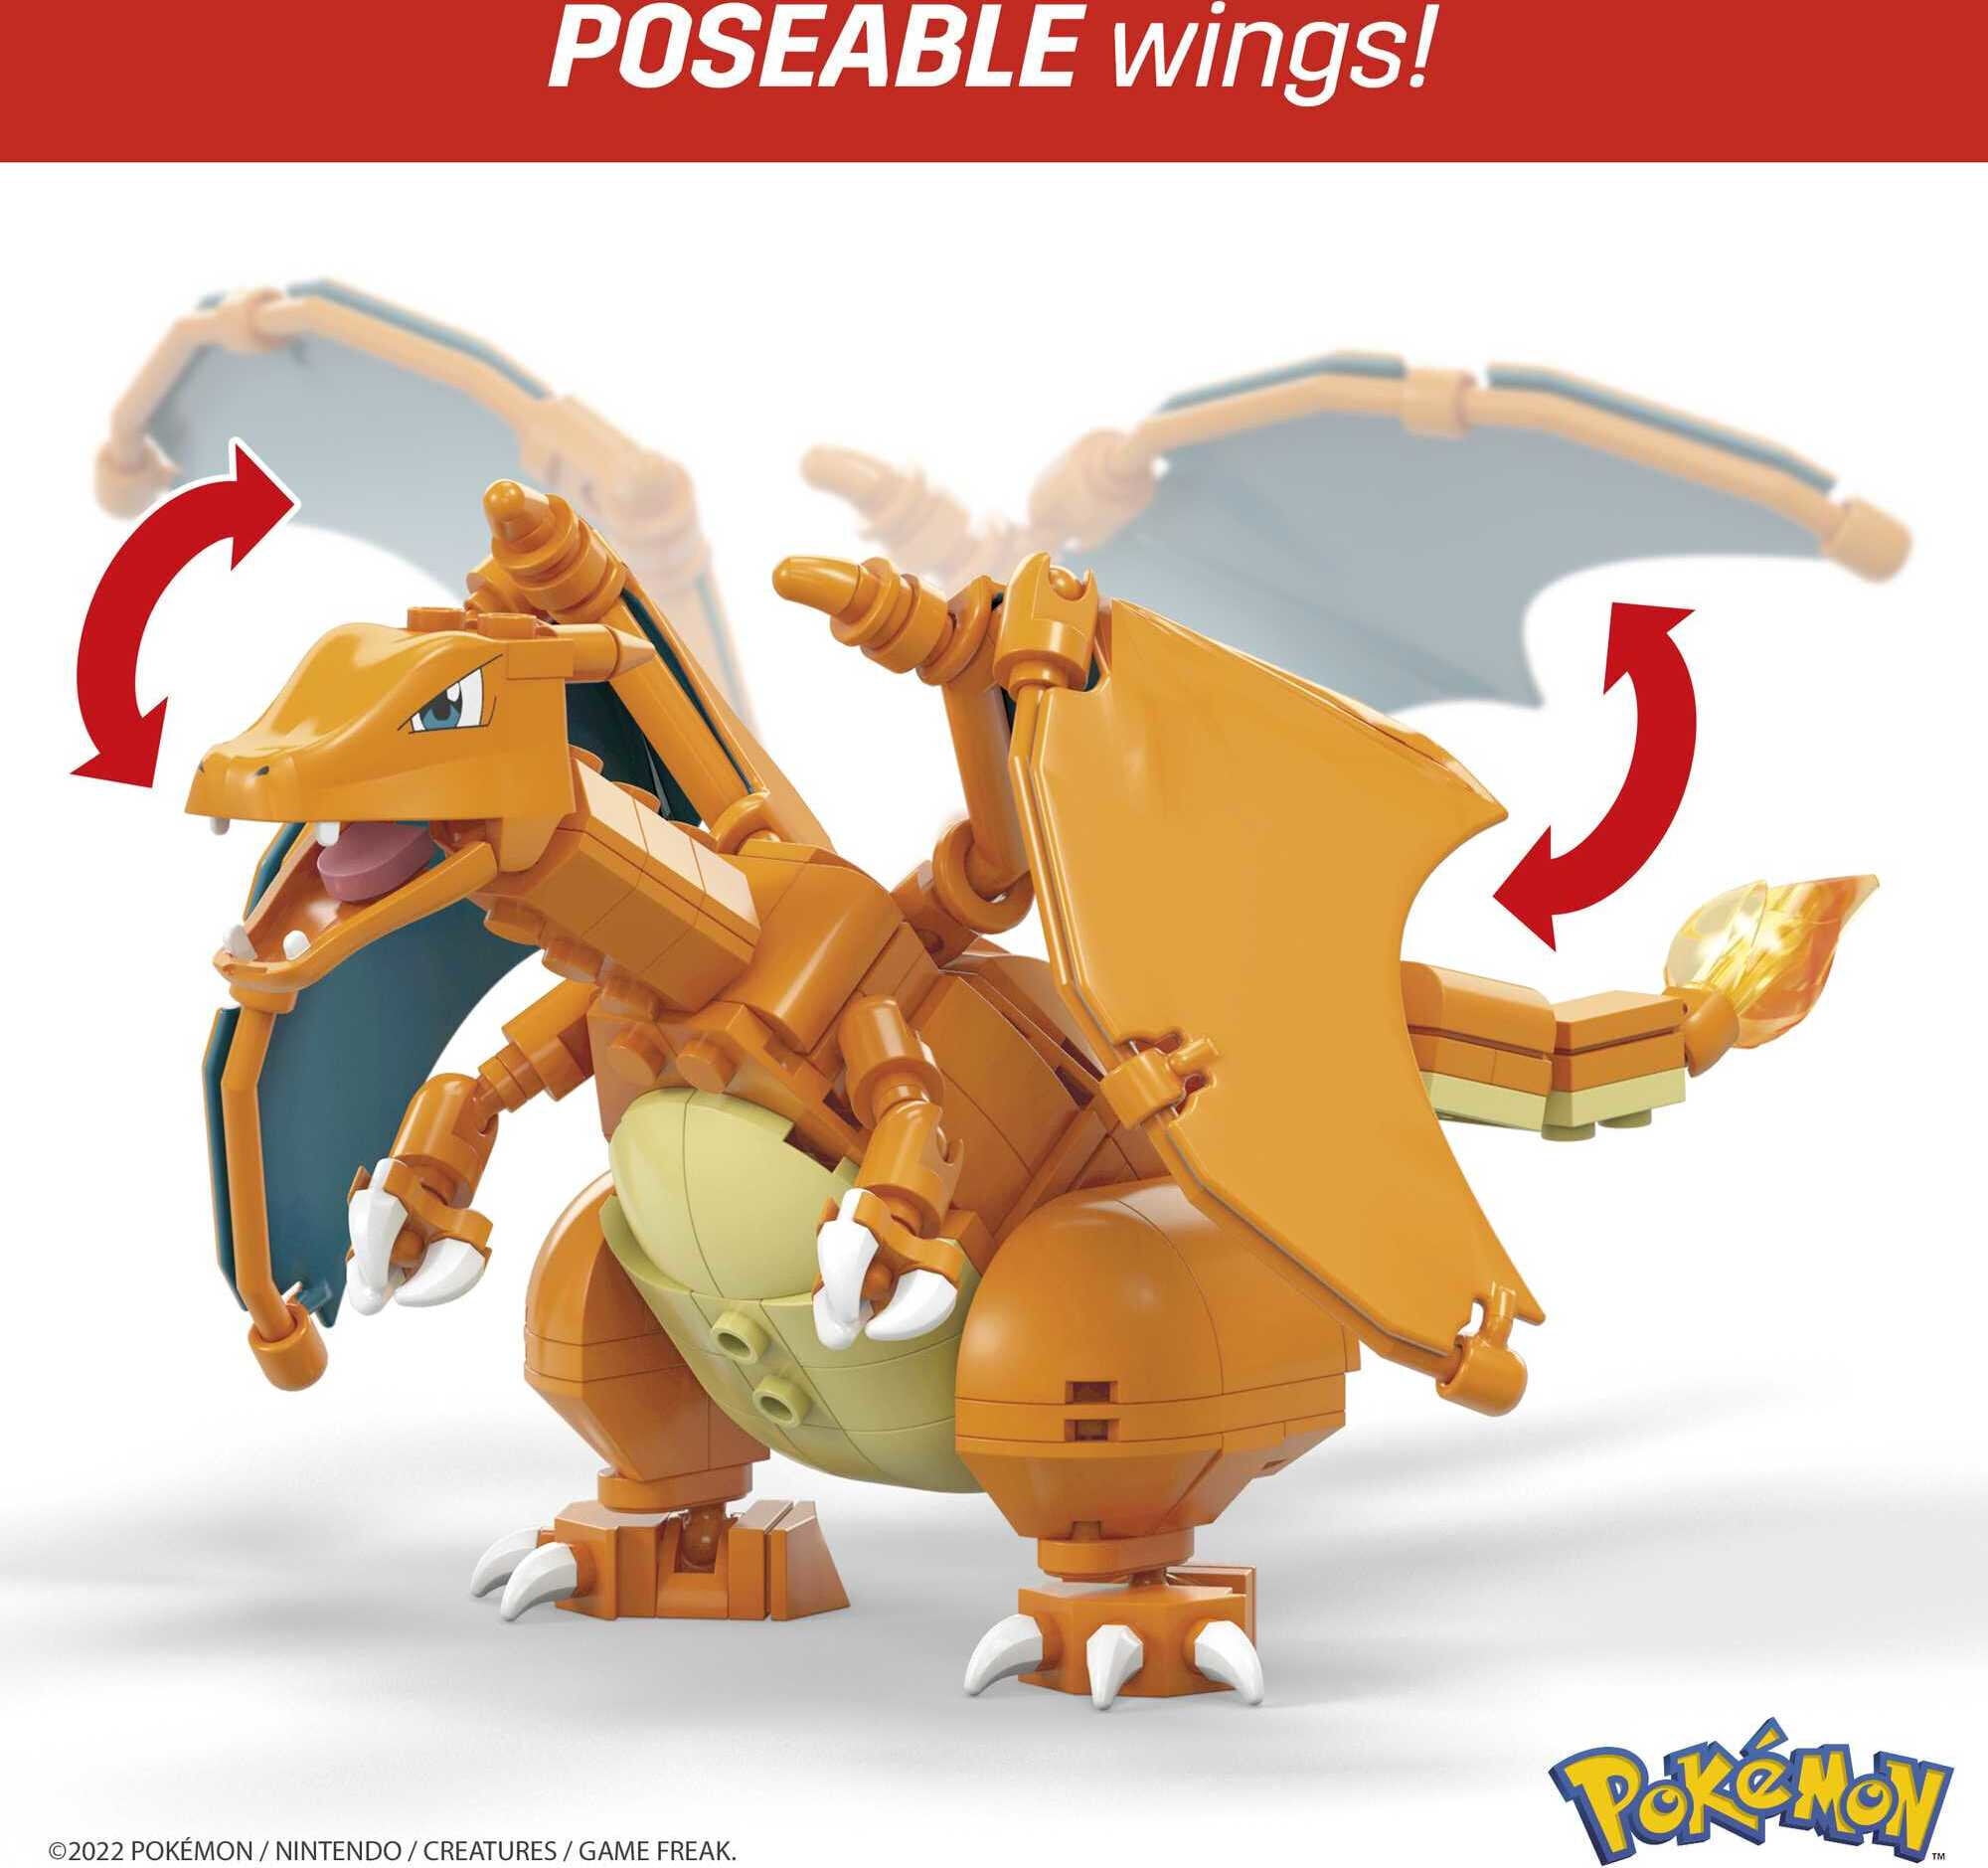 Mega Construx Pokemon Charizard Construction Set with character figures,  Building Toys for Kids 198 Pieces